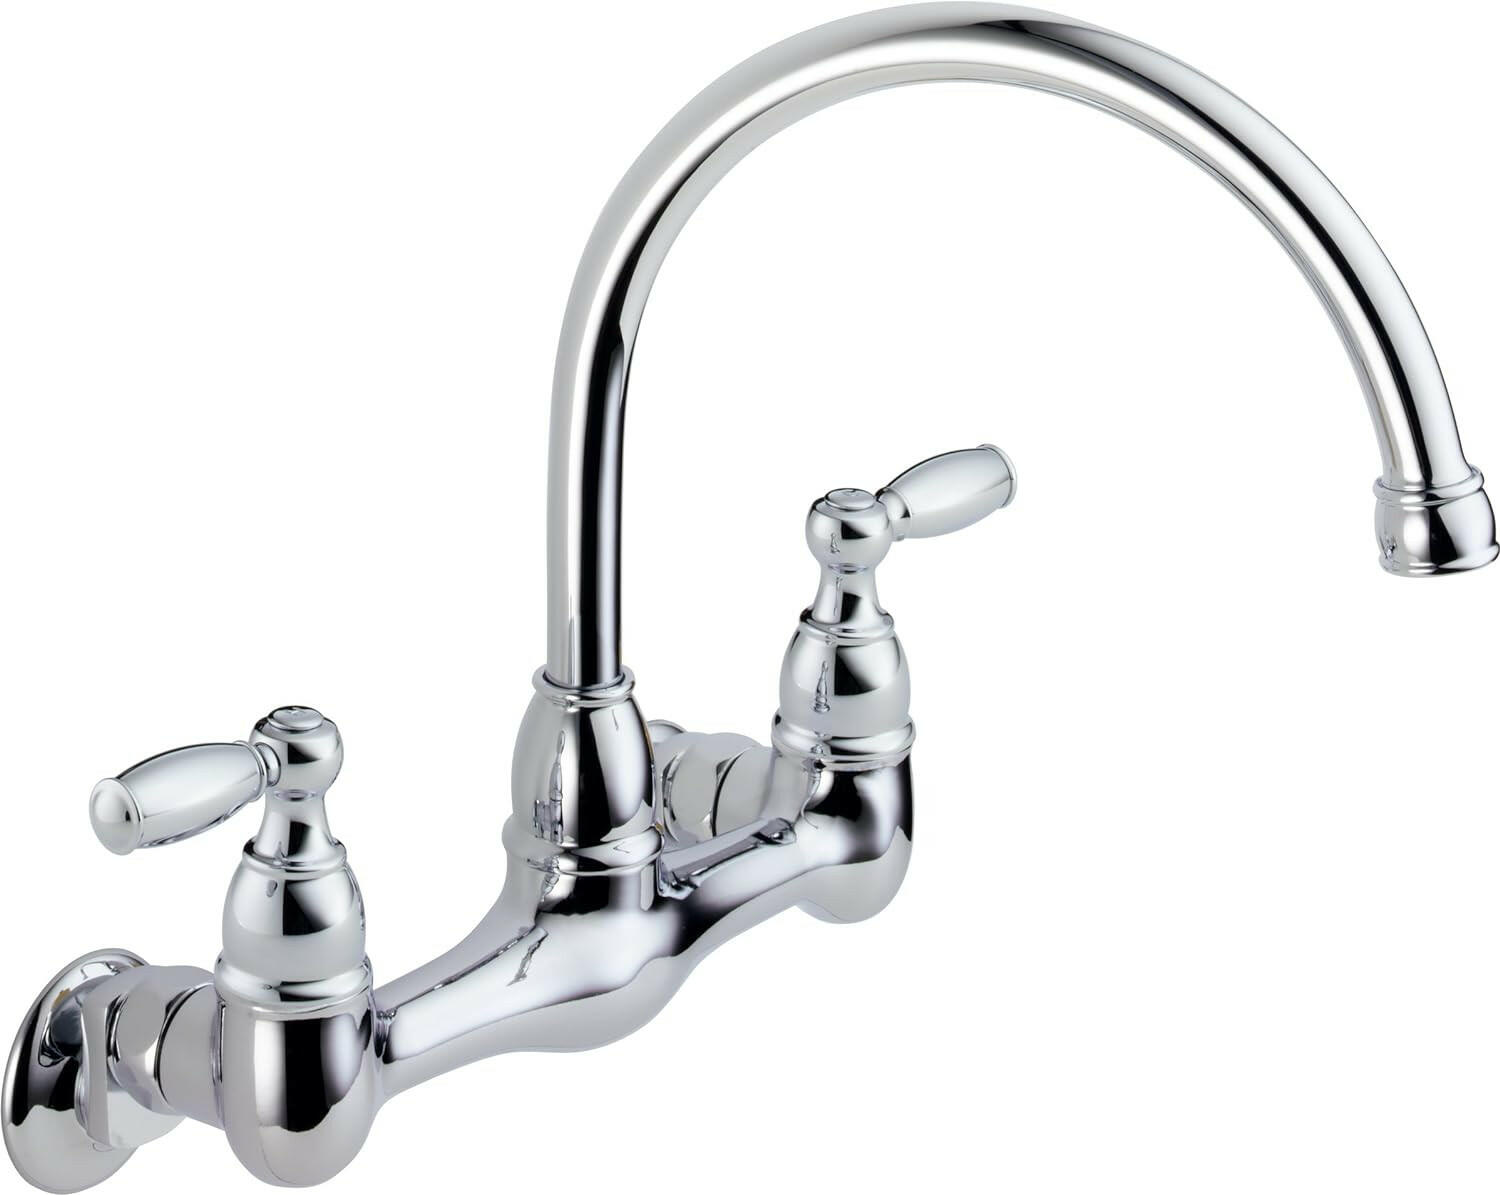 Peerless Claymore 2-Handle Wall-Mount Kitchen Sink Faucet, Chrome